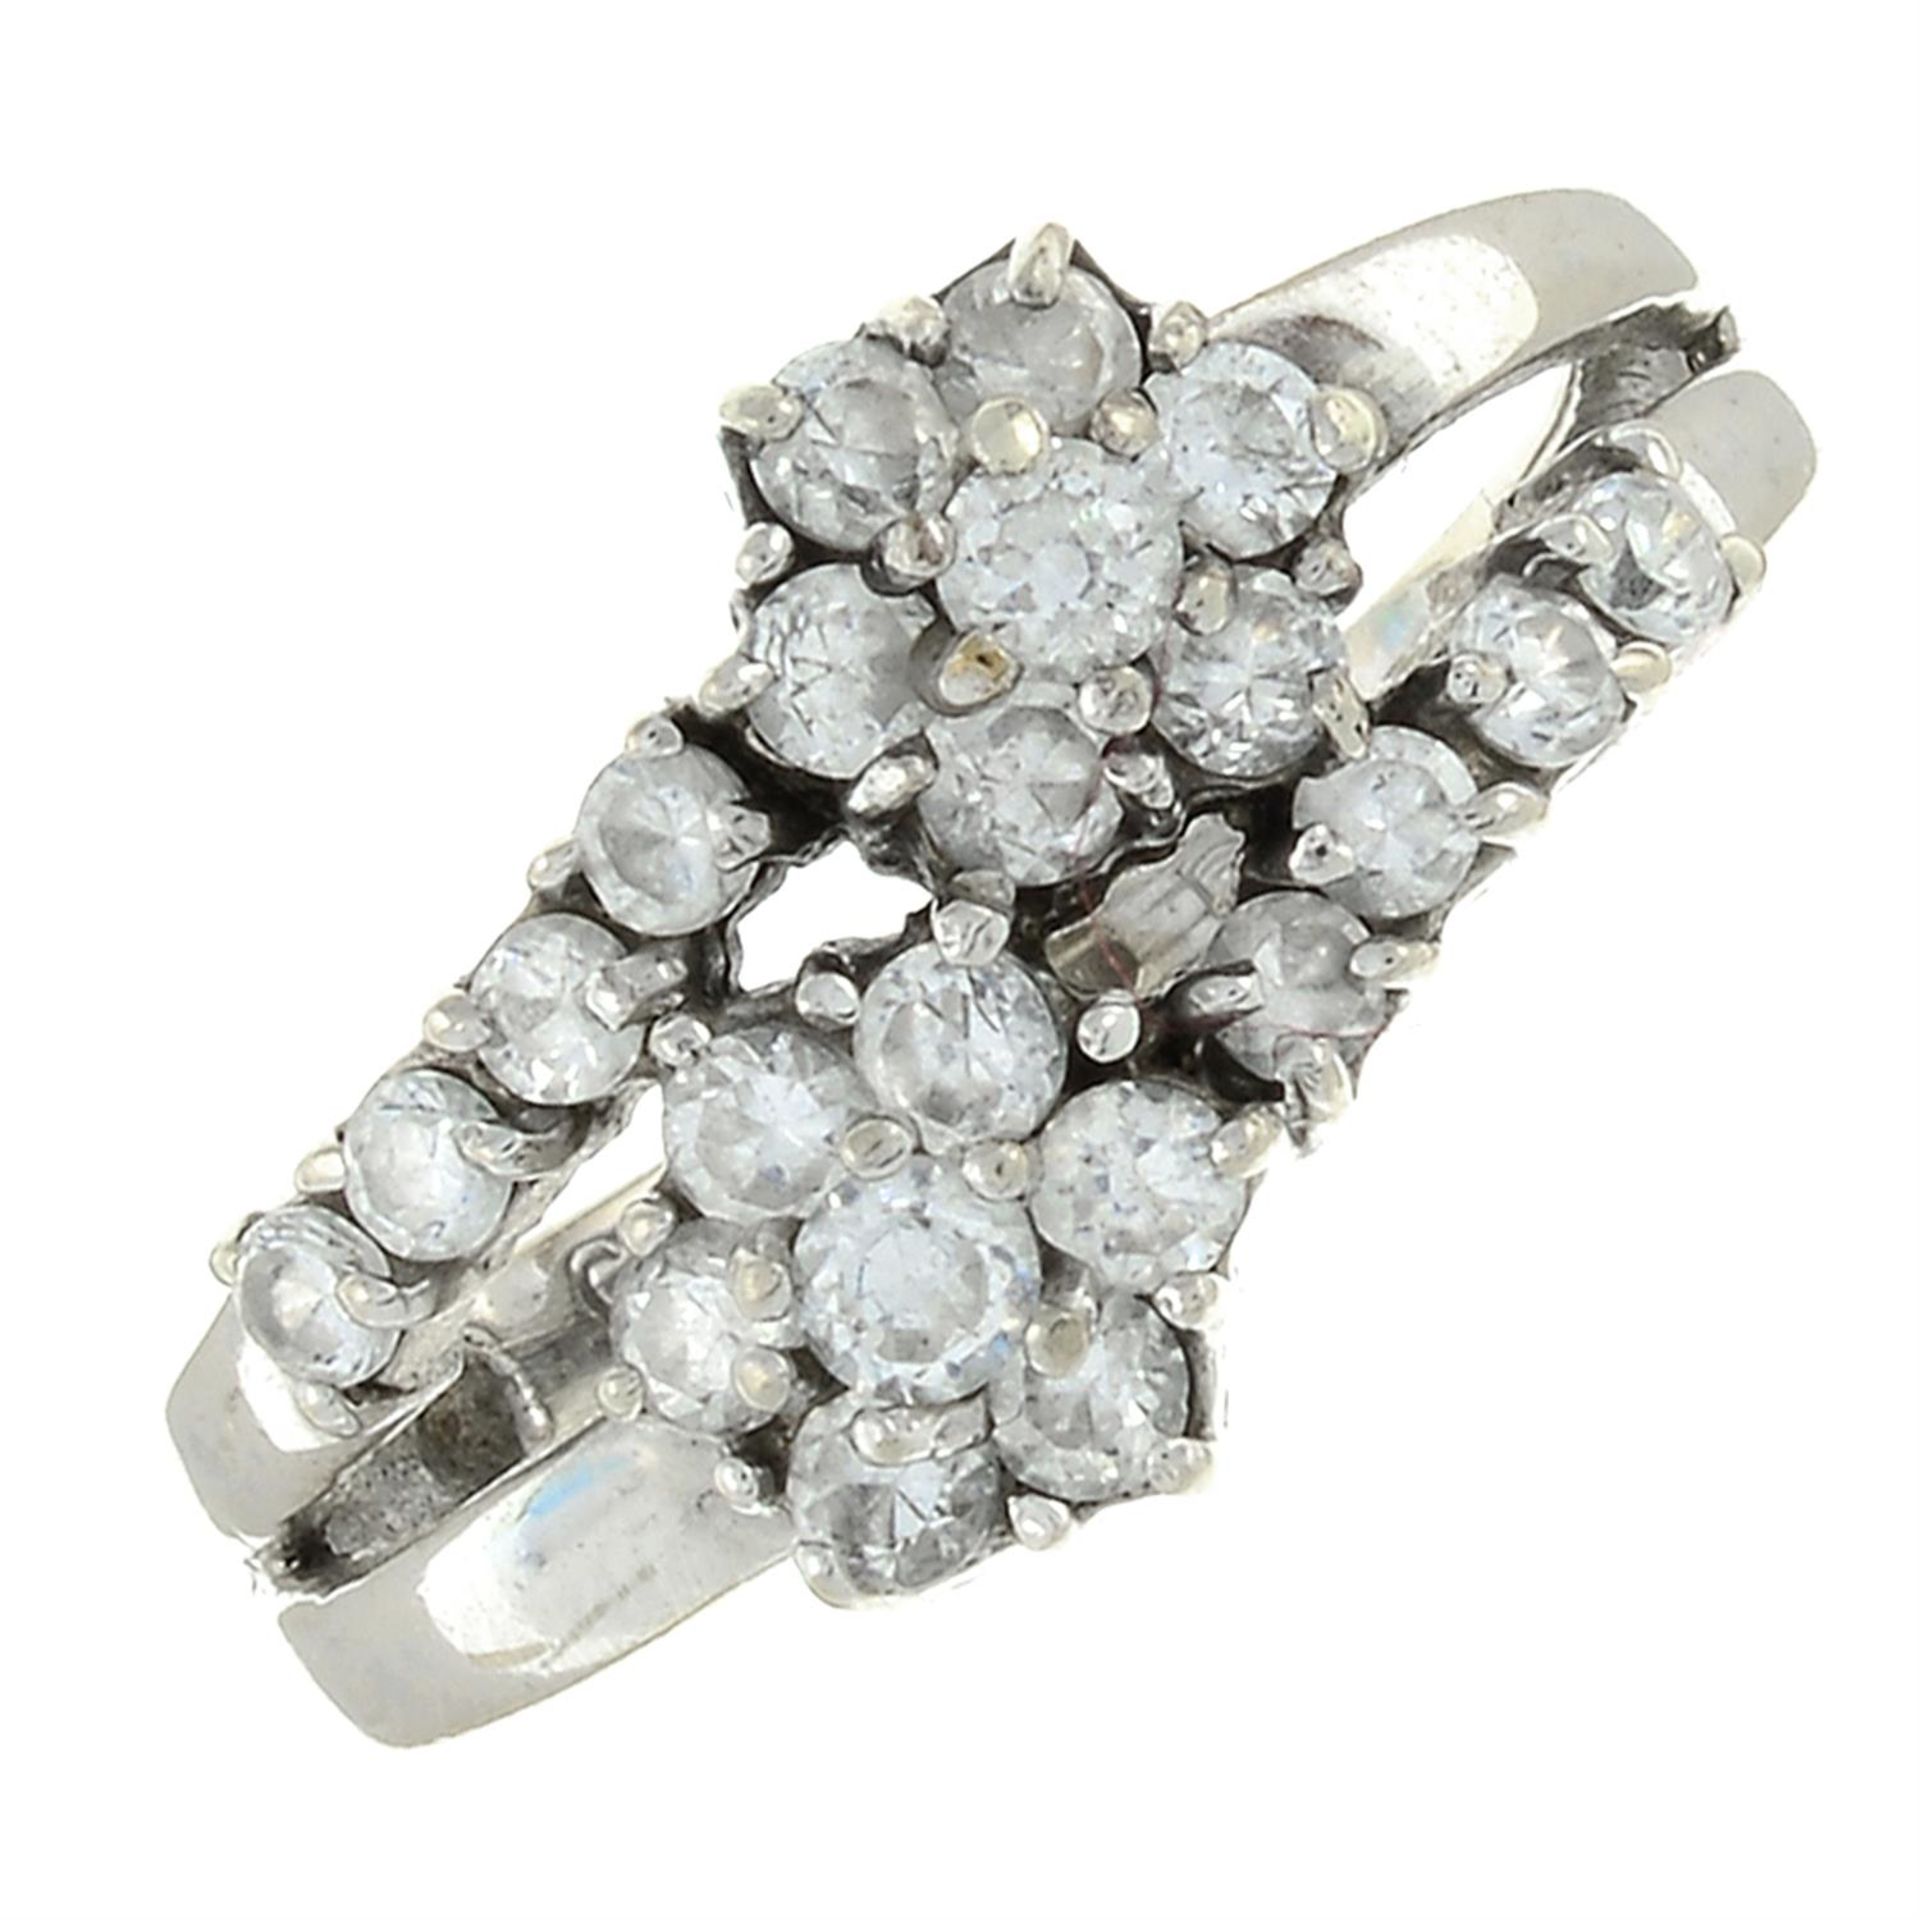 A 9ct gold cubic zirconia cluster crossover ring.